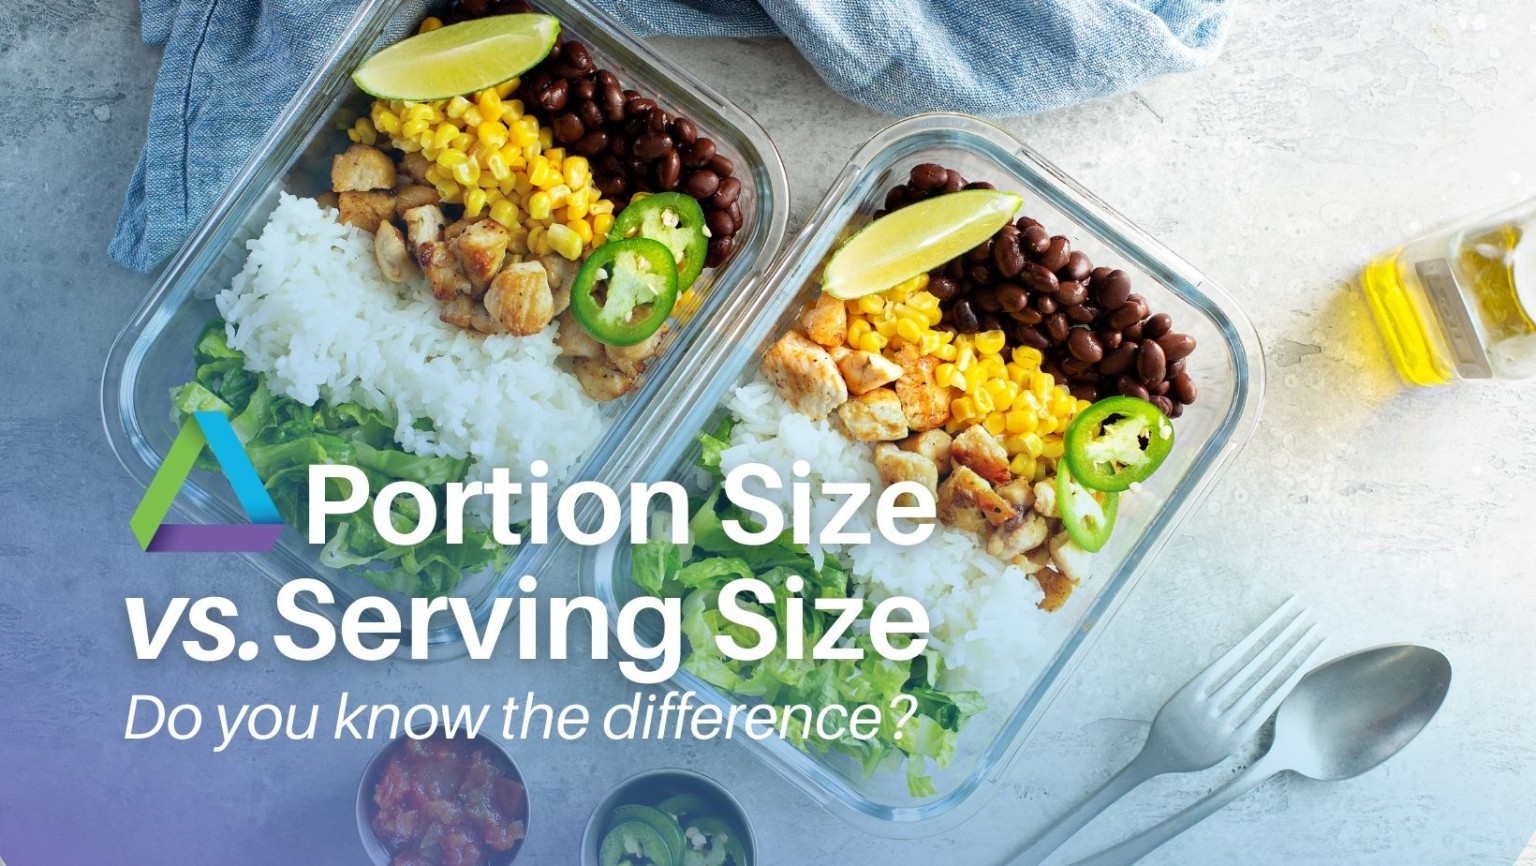 Portion Size Vs. Serving Size > Nutrition > Blog > Inspired Health Group -  Orchard Park, NY - Family Medicine Practice